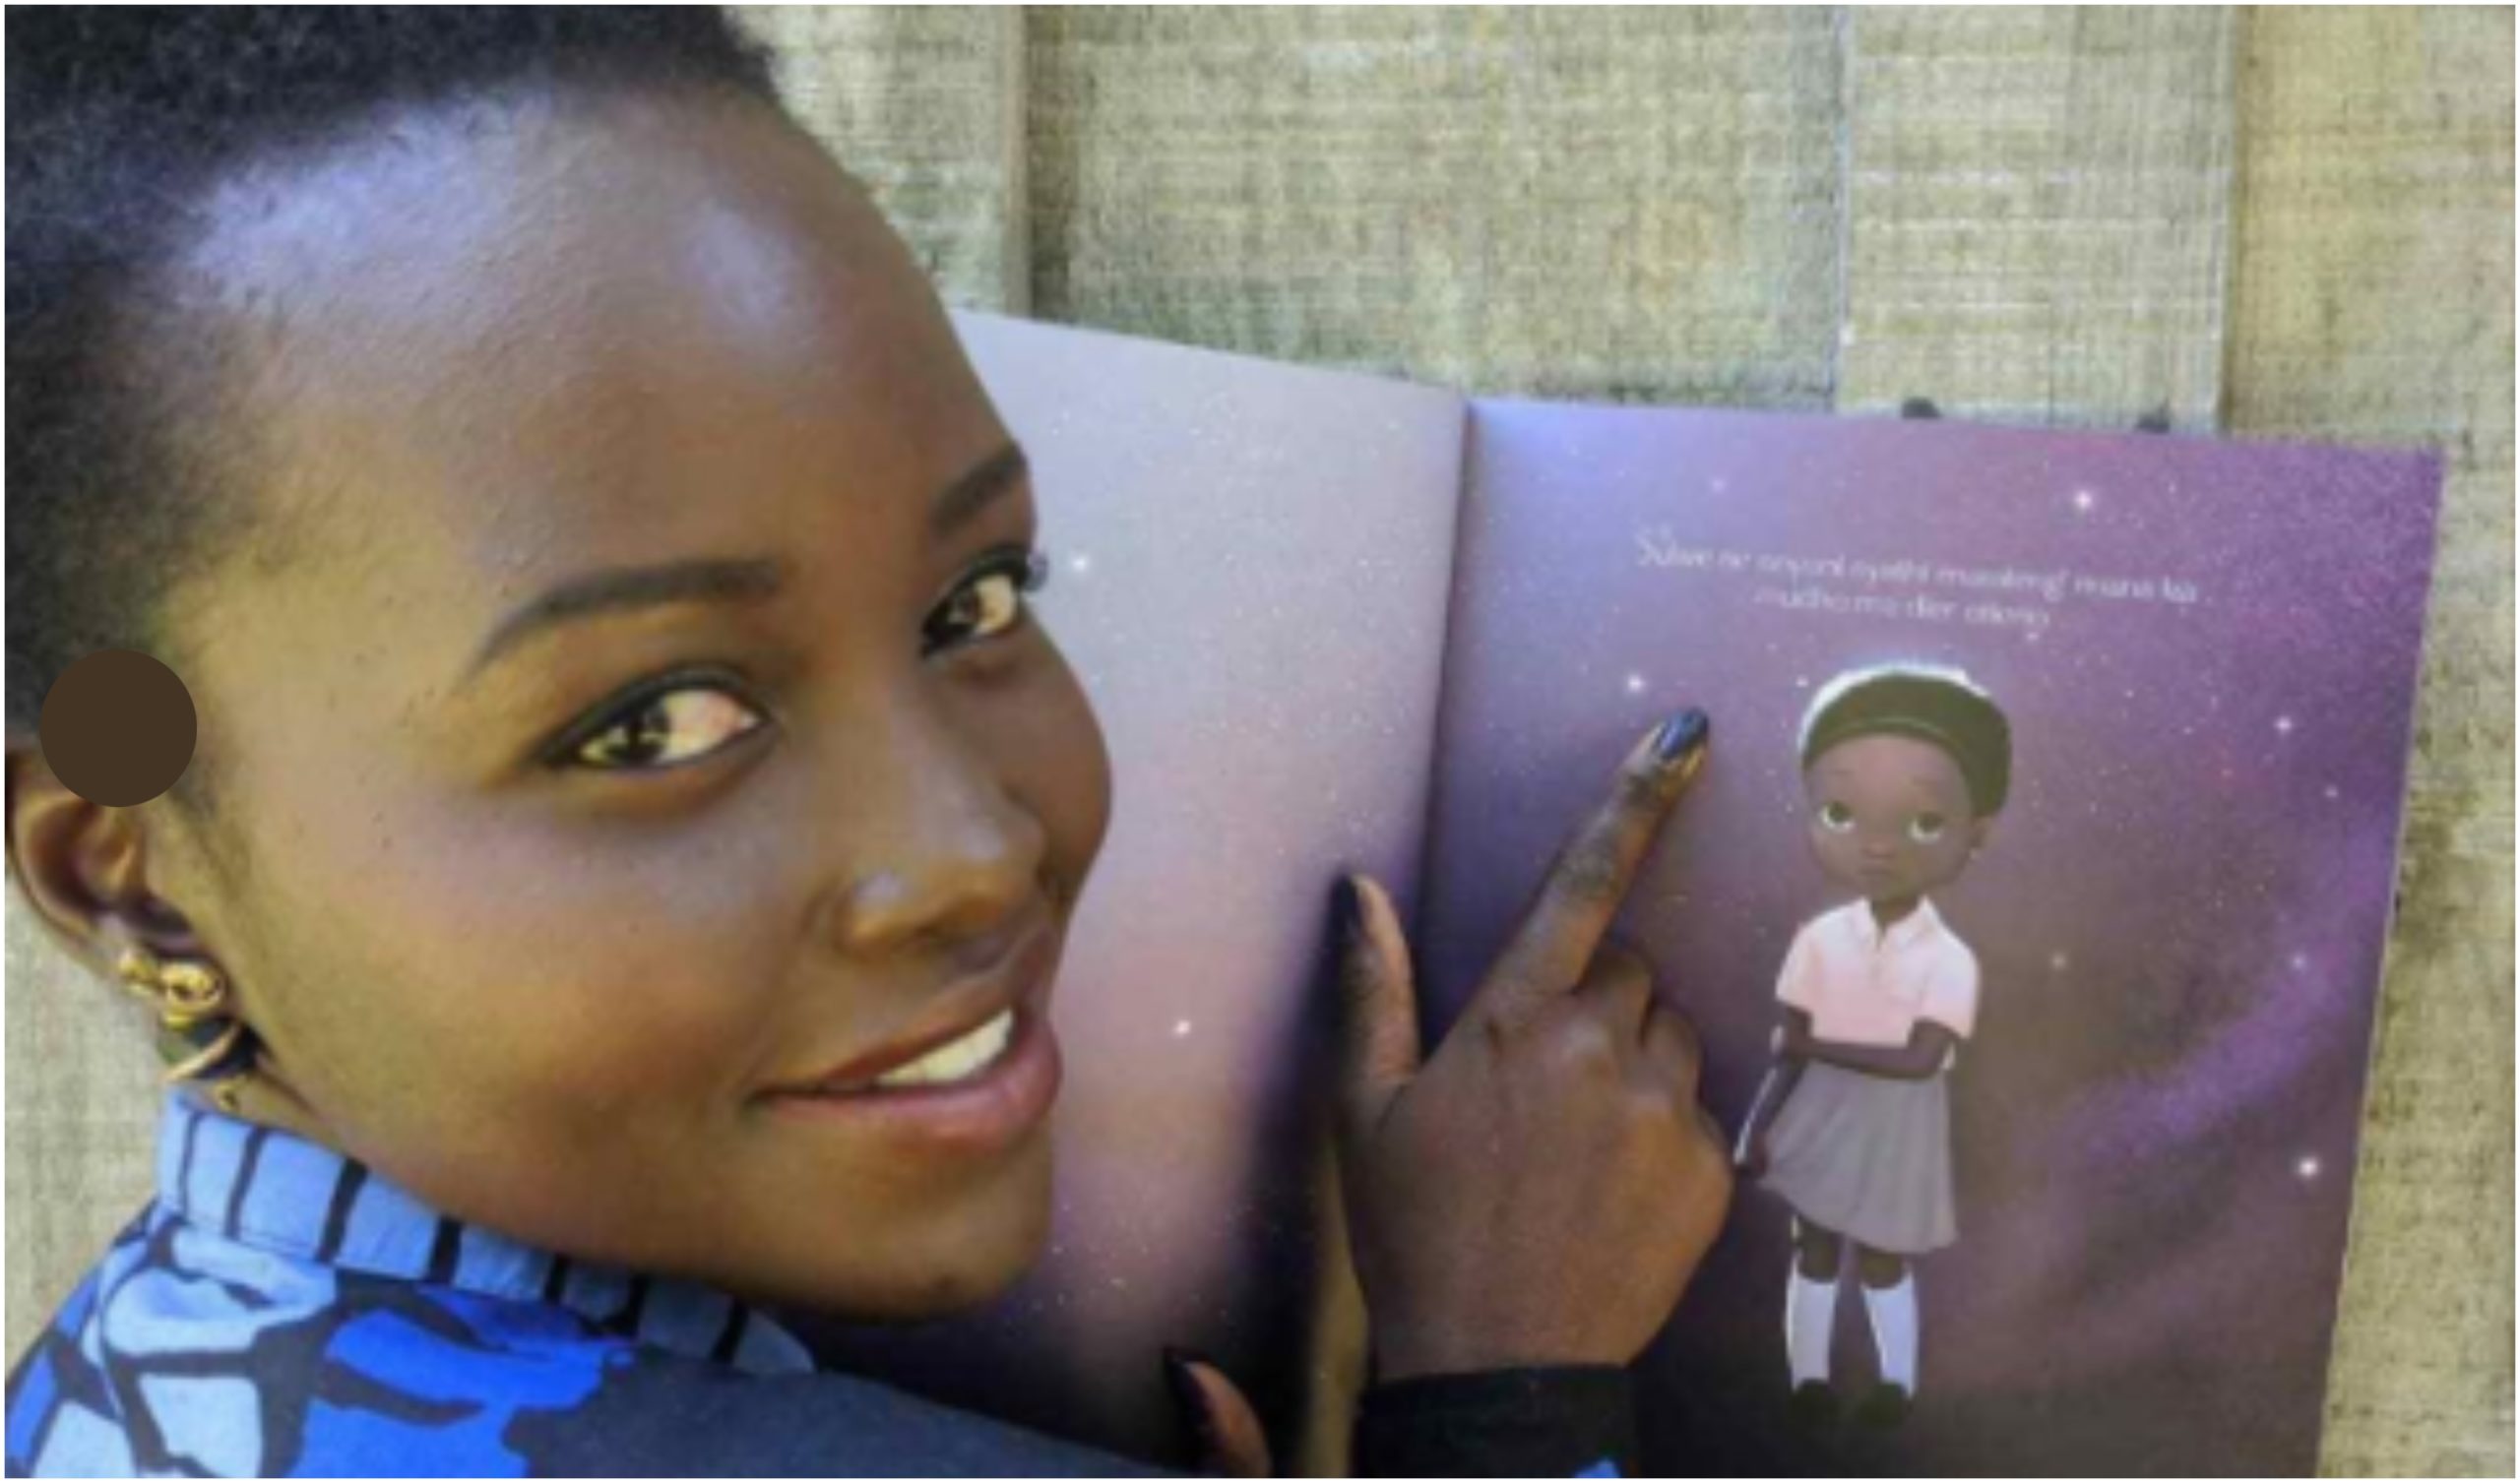 Lupita Nyongo’s book Sulwe coming home in Kiswahili and Luo dialects